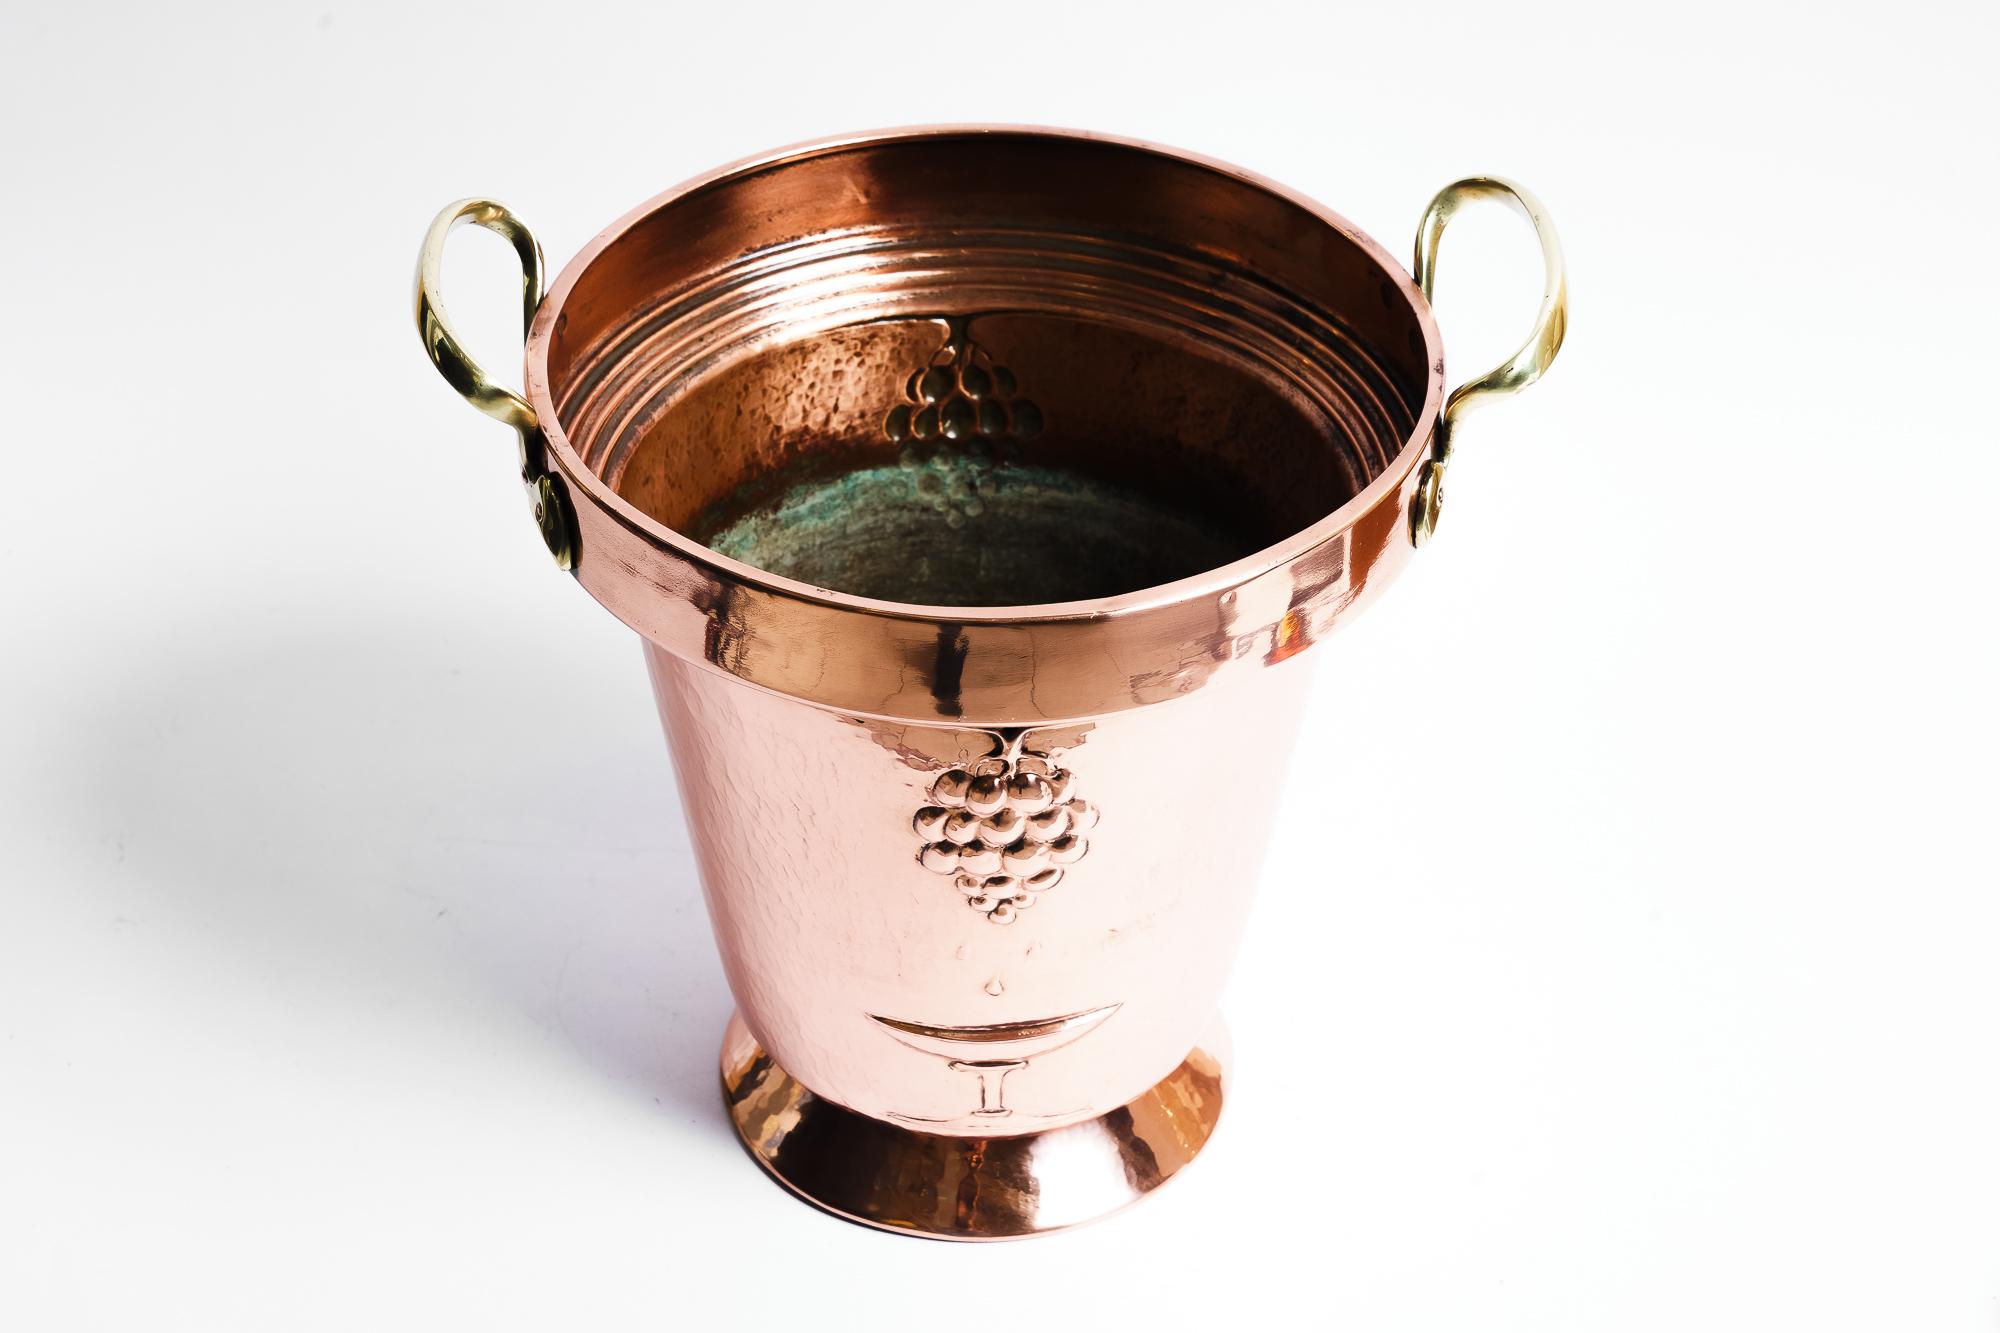 Copper and brass champagne cooler, Vienna, 1930s
Polished and stove enameled
